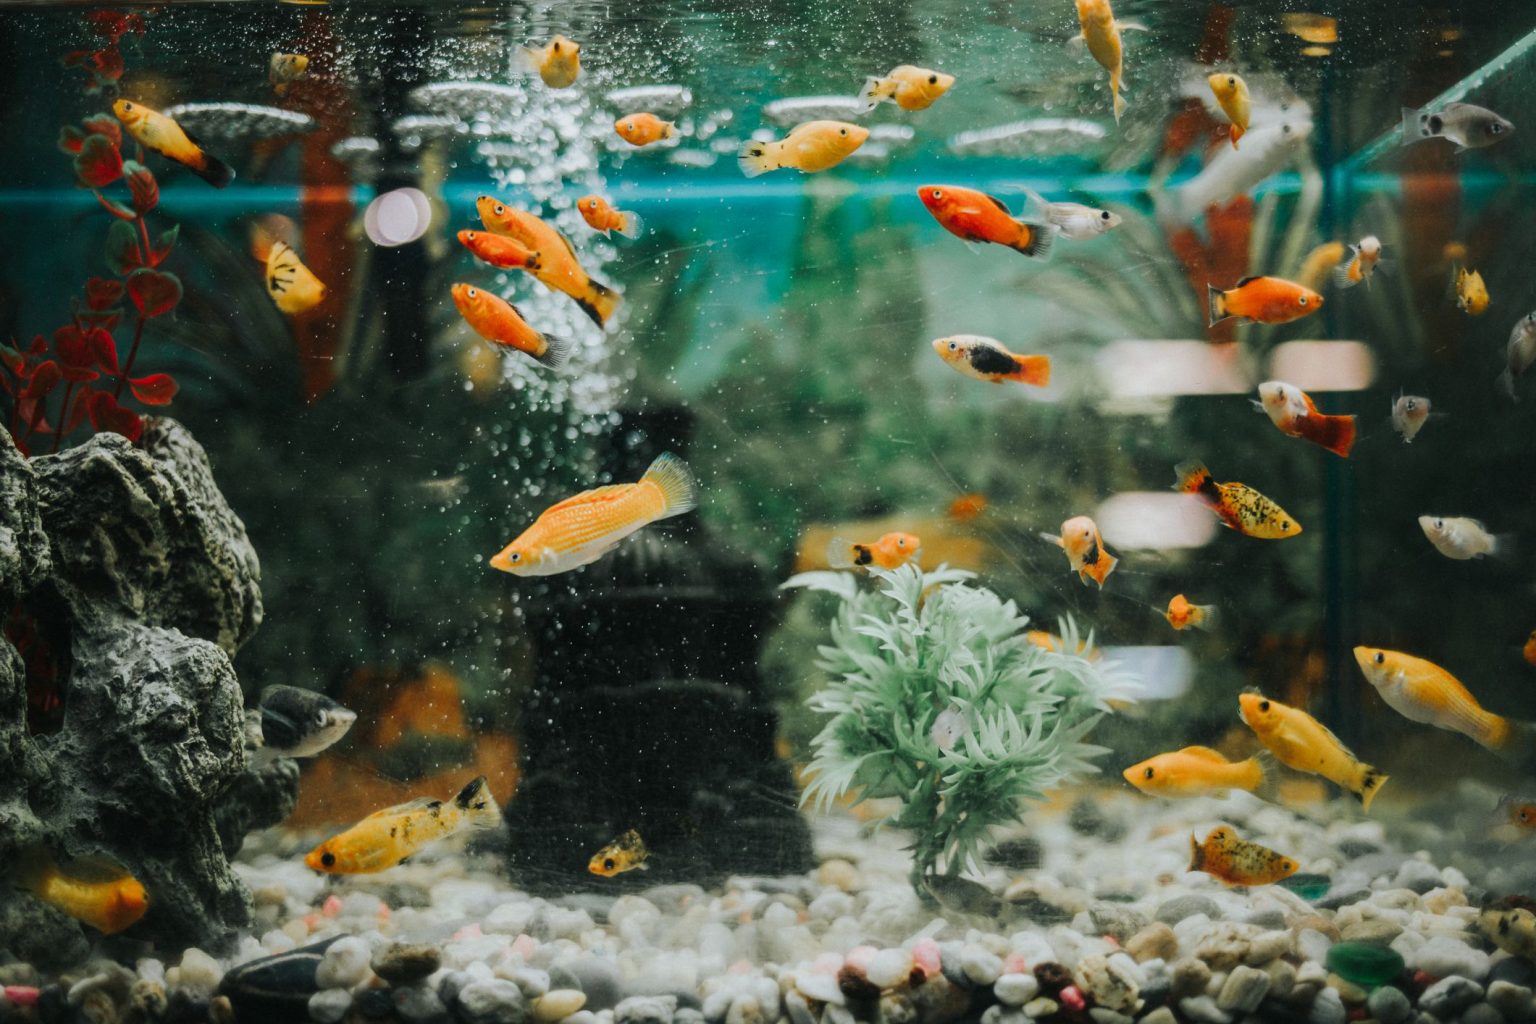 How to Get Rid of Hard Water Stains on Your Aquarium